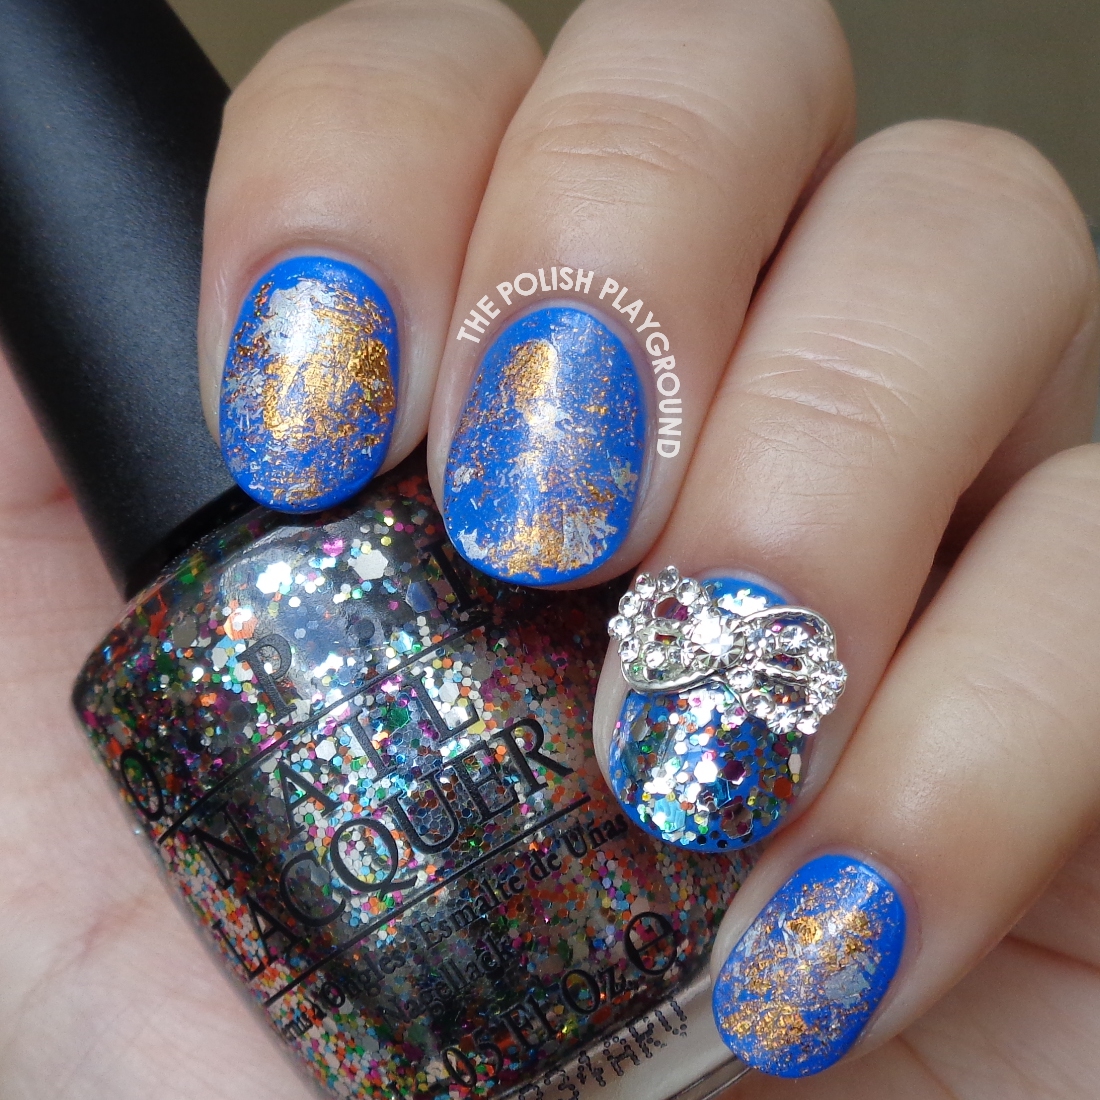 The Polish Playground: Blue with Silver and Bronze Nail Foil